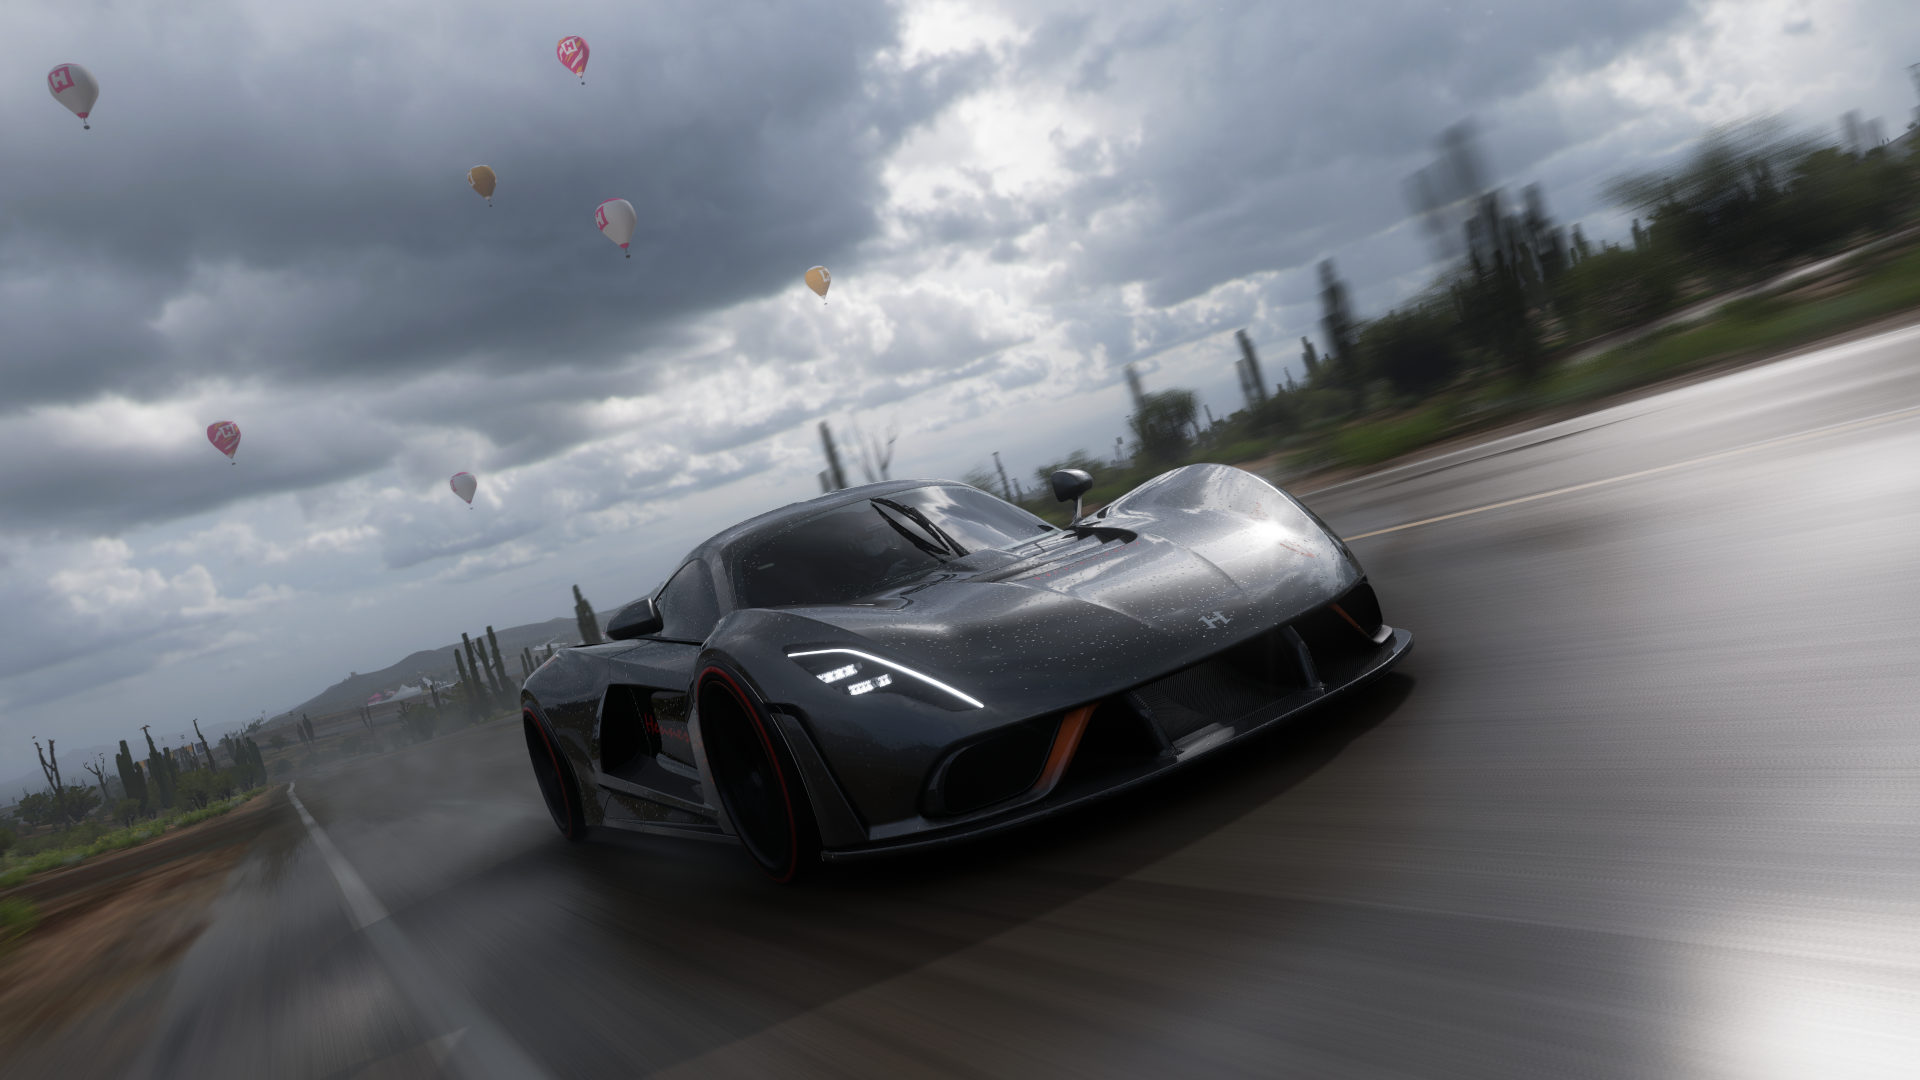 General 1920x1080 Forza Horizon 5 screen shot PC gaming Hennessey Hypercar Hennessey Venom F5 car PlaygroundGames vehicle clouds video games hot air balloons CGI American cars cactus video game art